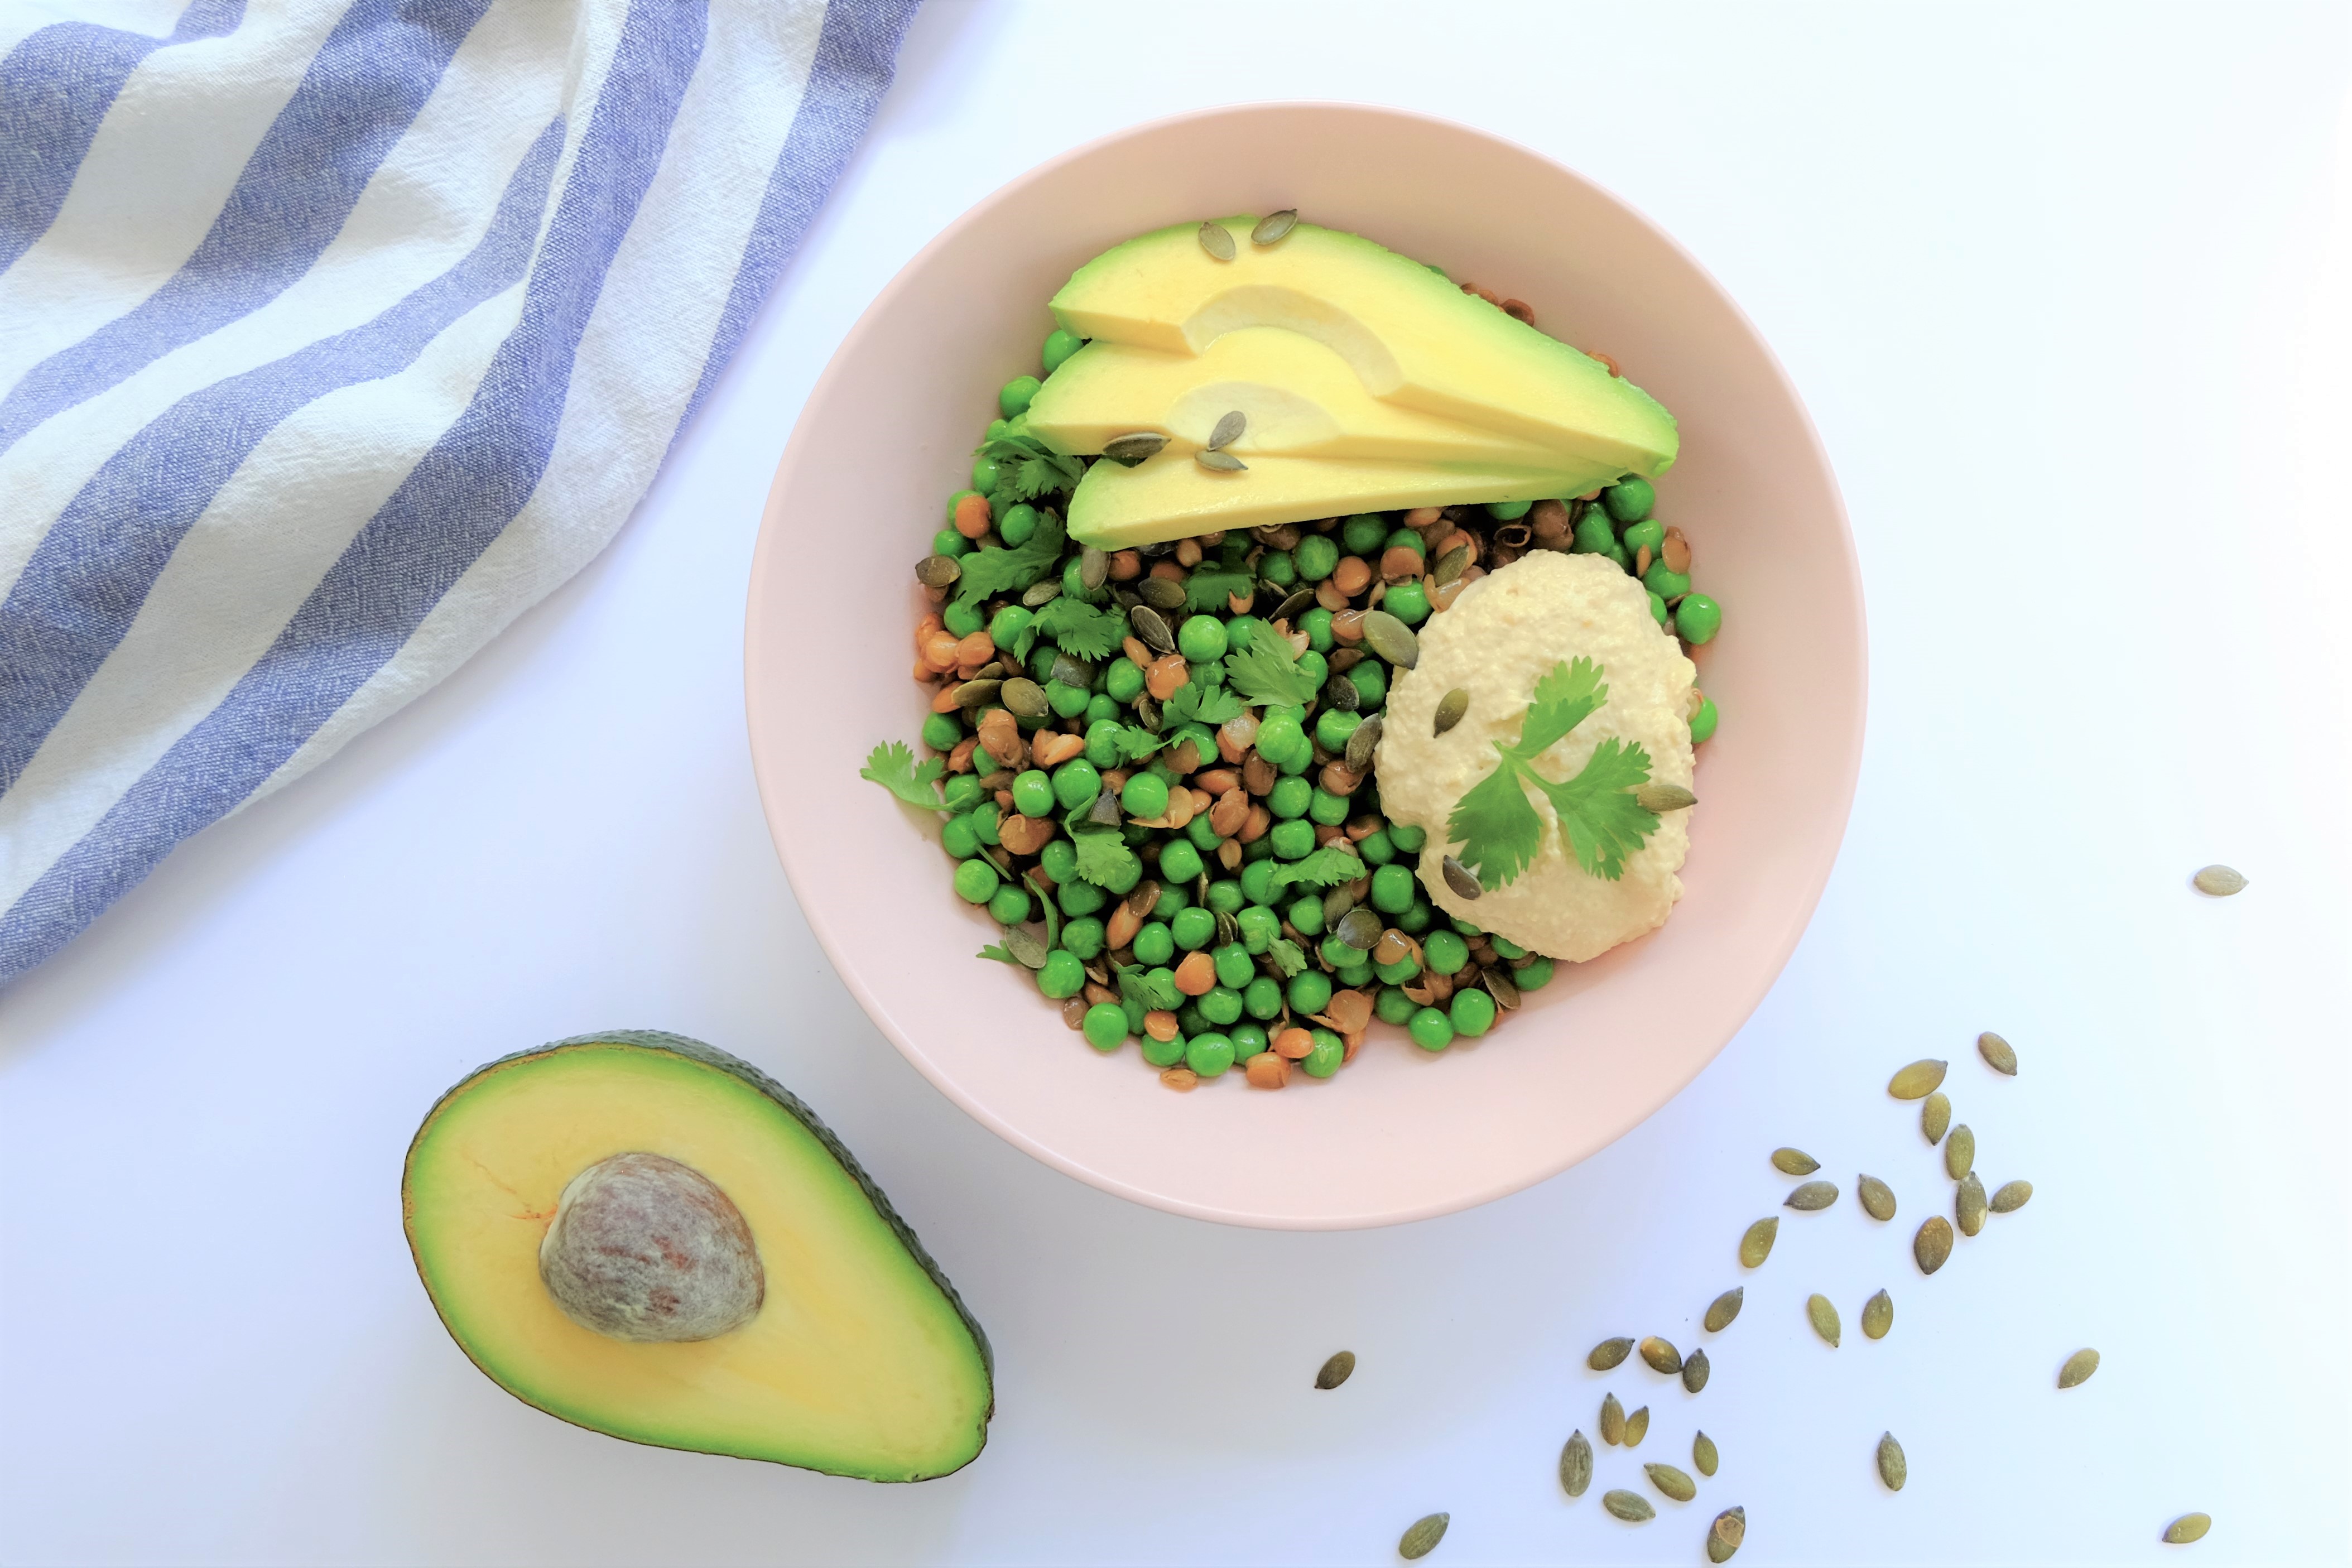 Pea and Lentil Salad Recipe by Mindy Perley-Martin